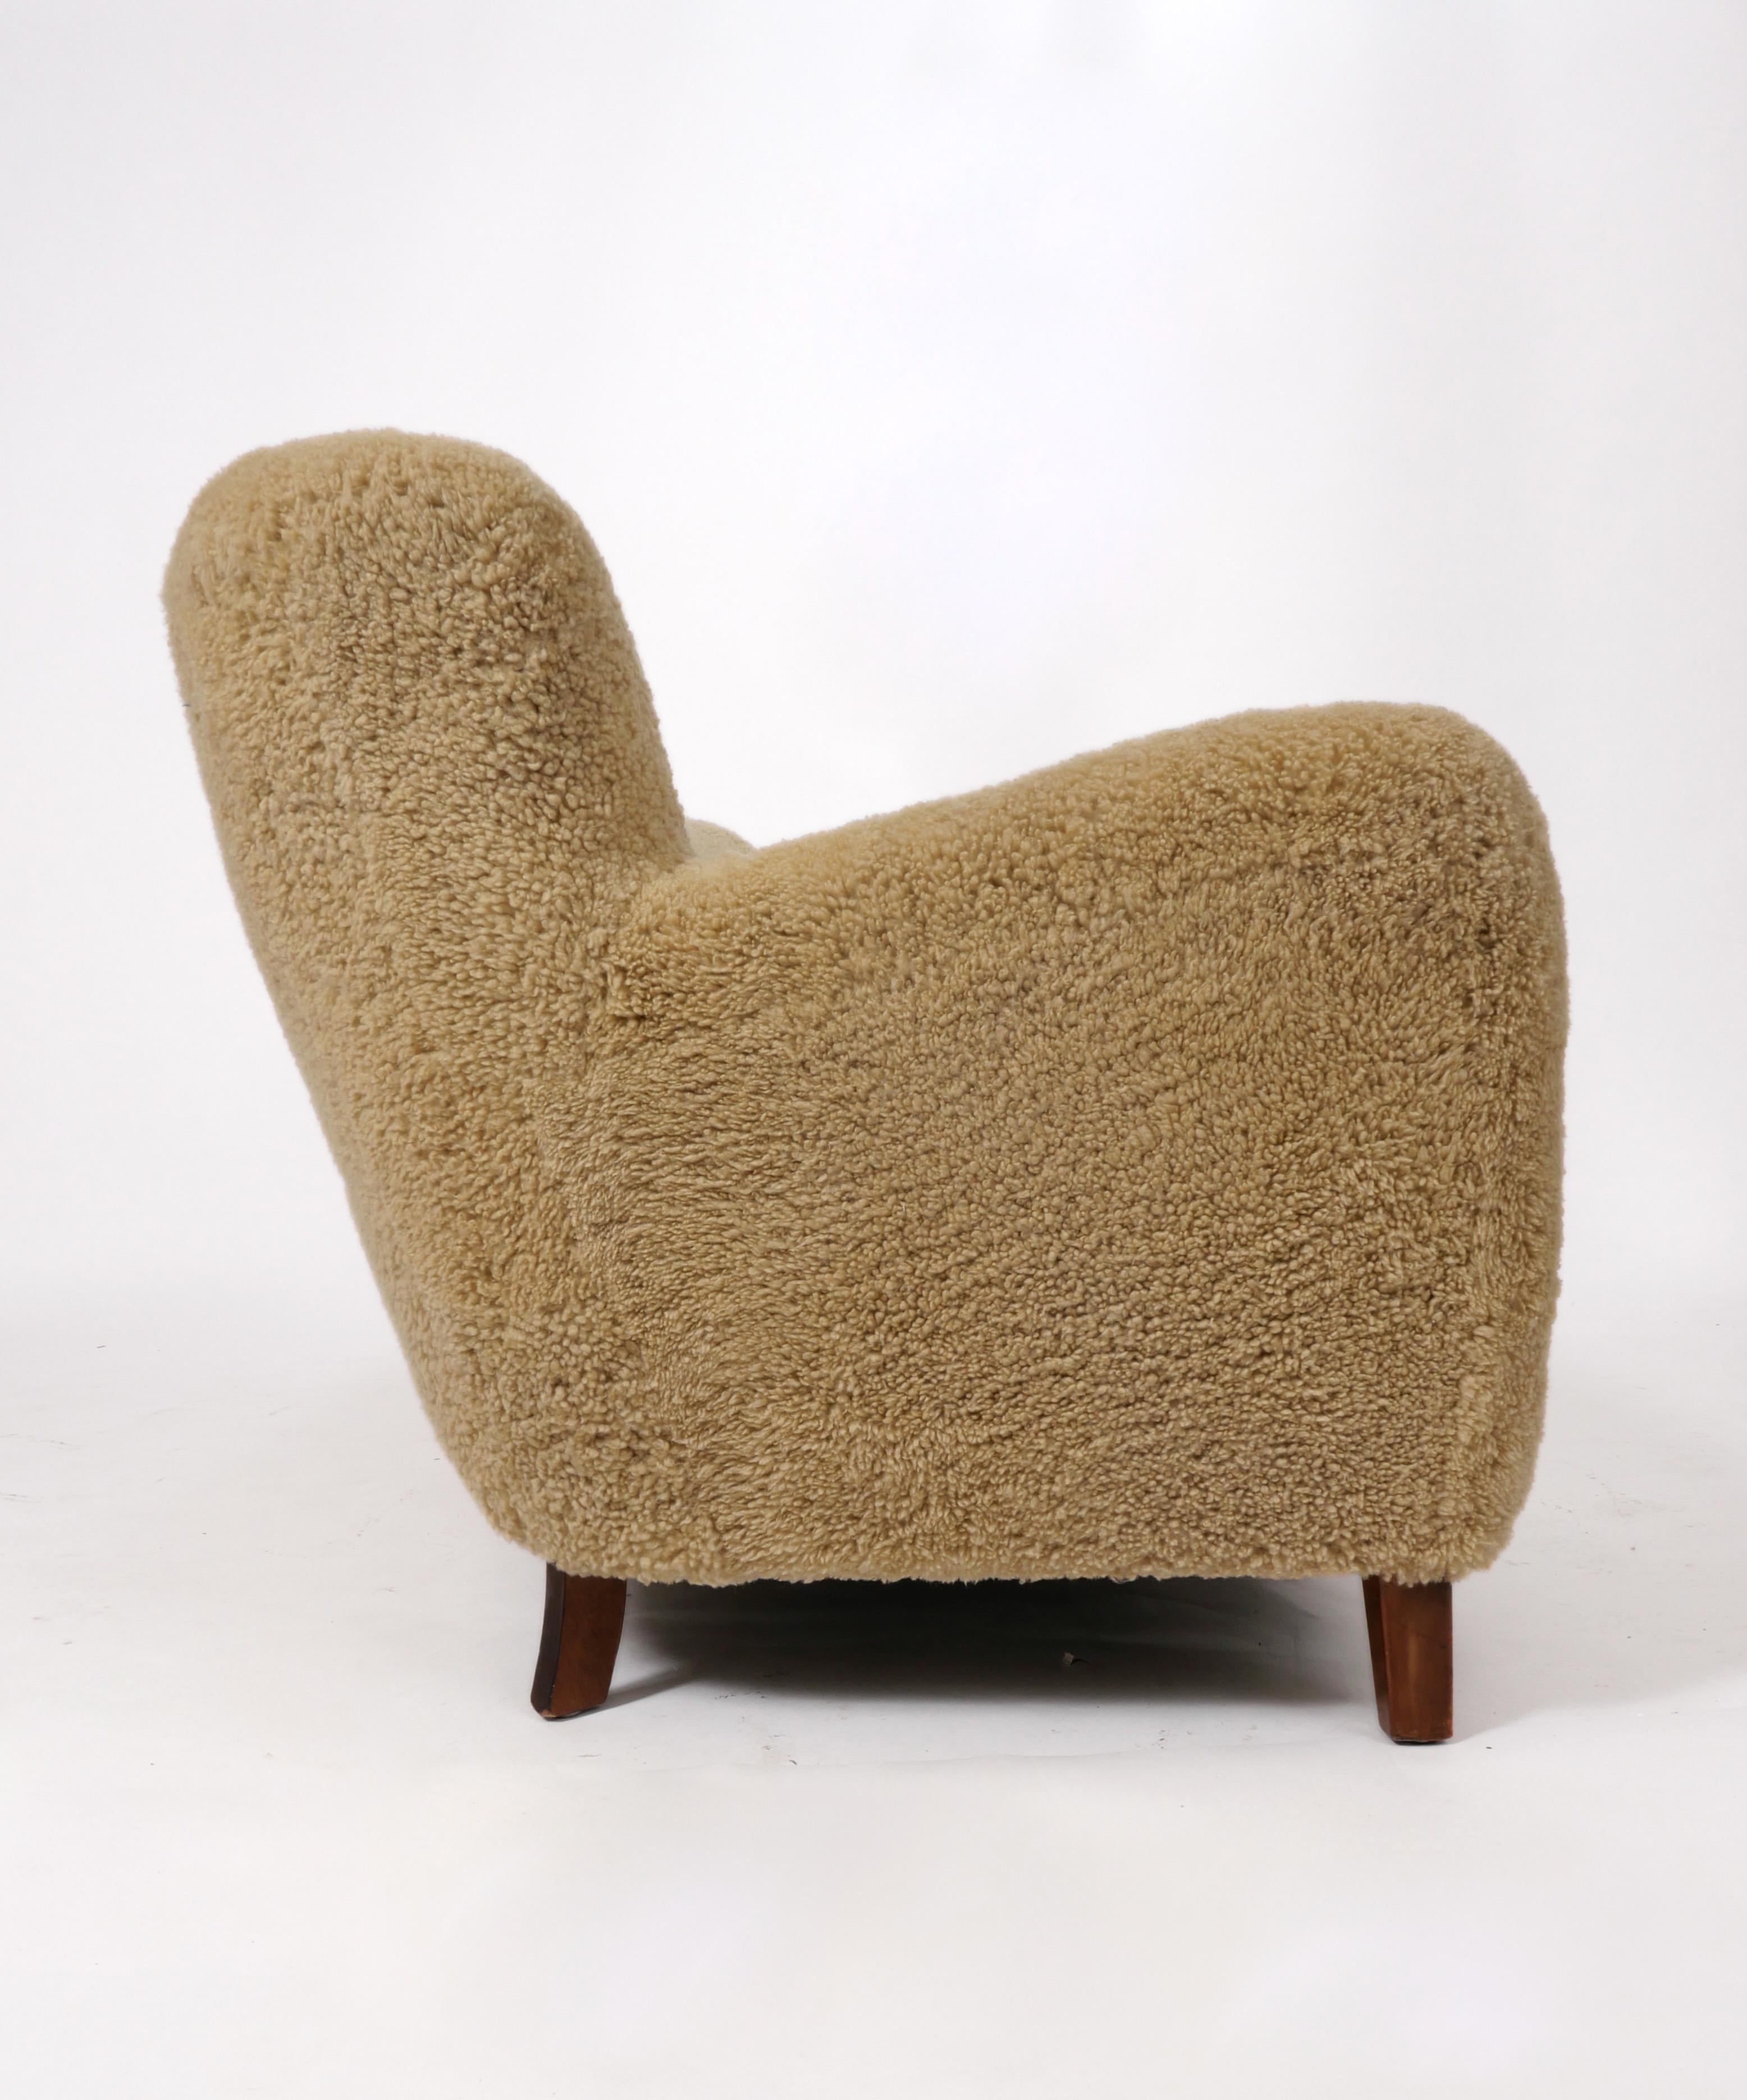 A classic silhouette; circa 1940s-40s Danish Cabinetmaker sofa, freshly upholstered in wonderful natural sheepskin. Buttons at back are done in cognac full-grain leather- which provides a subtle contrast and pairs nicely with the legs, which are